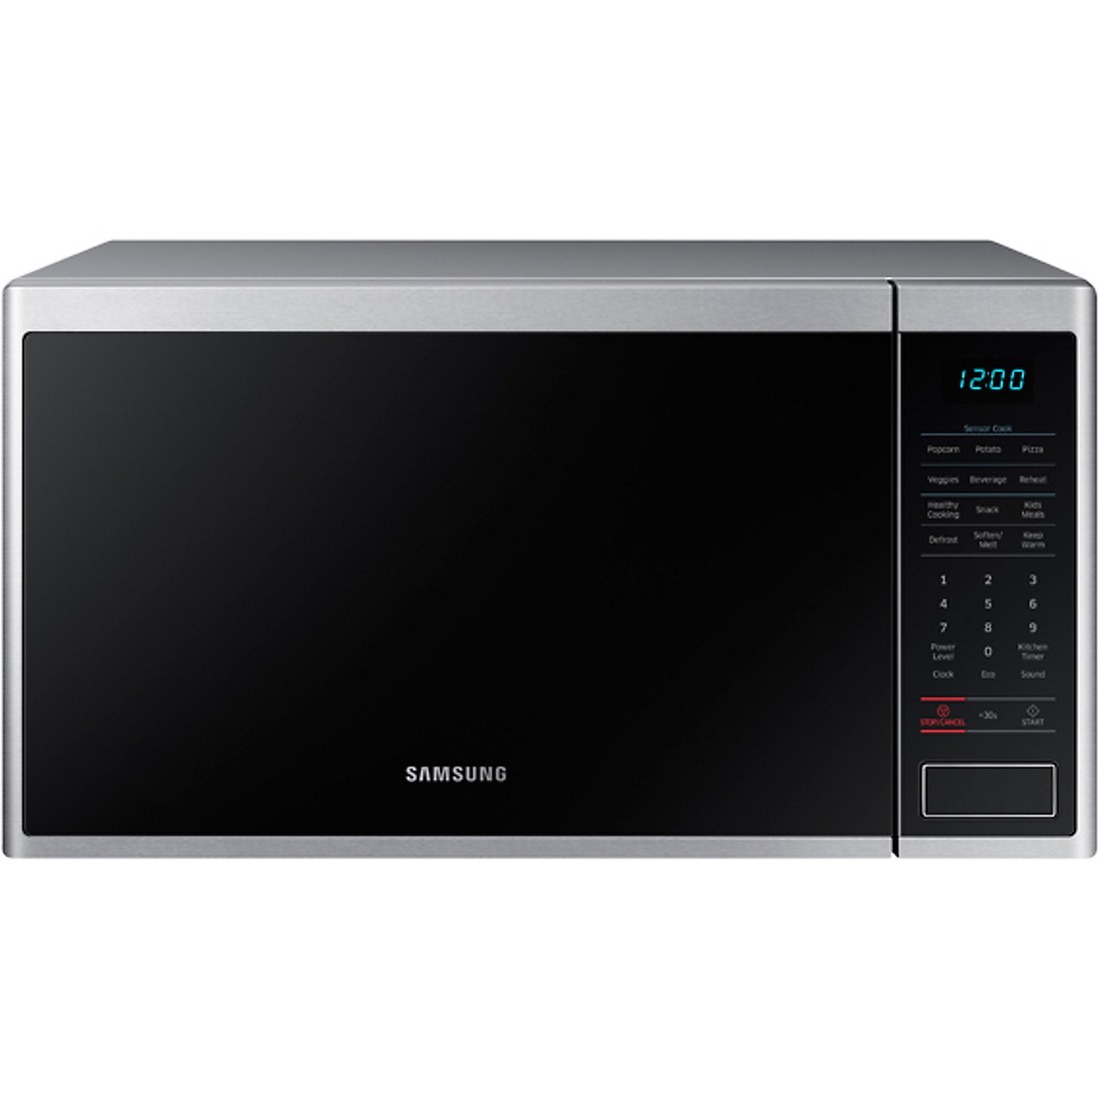 Samsung 1.4 cu. ft. Countertop Microwave- Stainless Steel - image 4 of 4